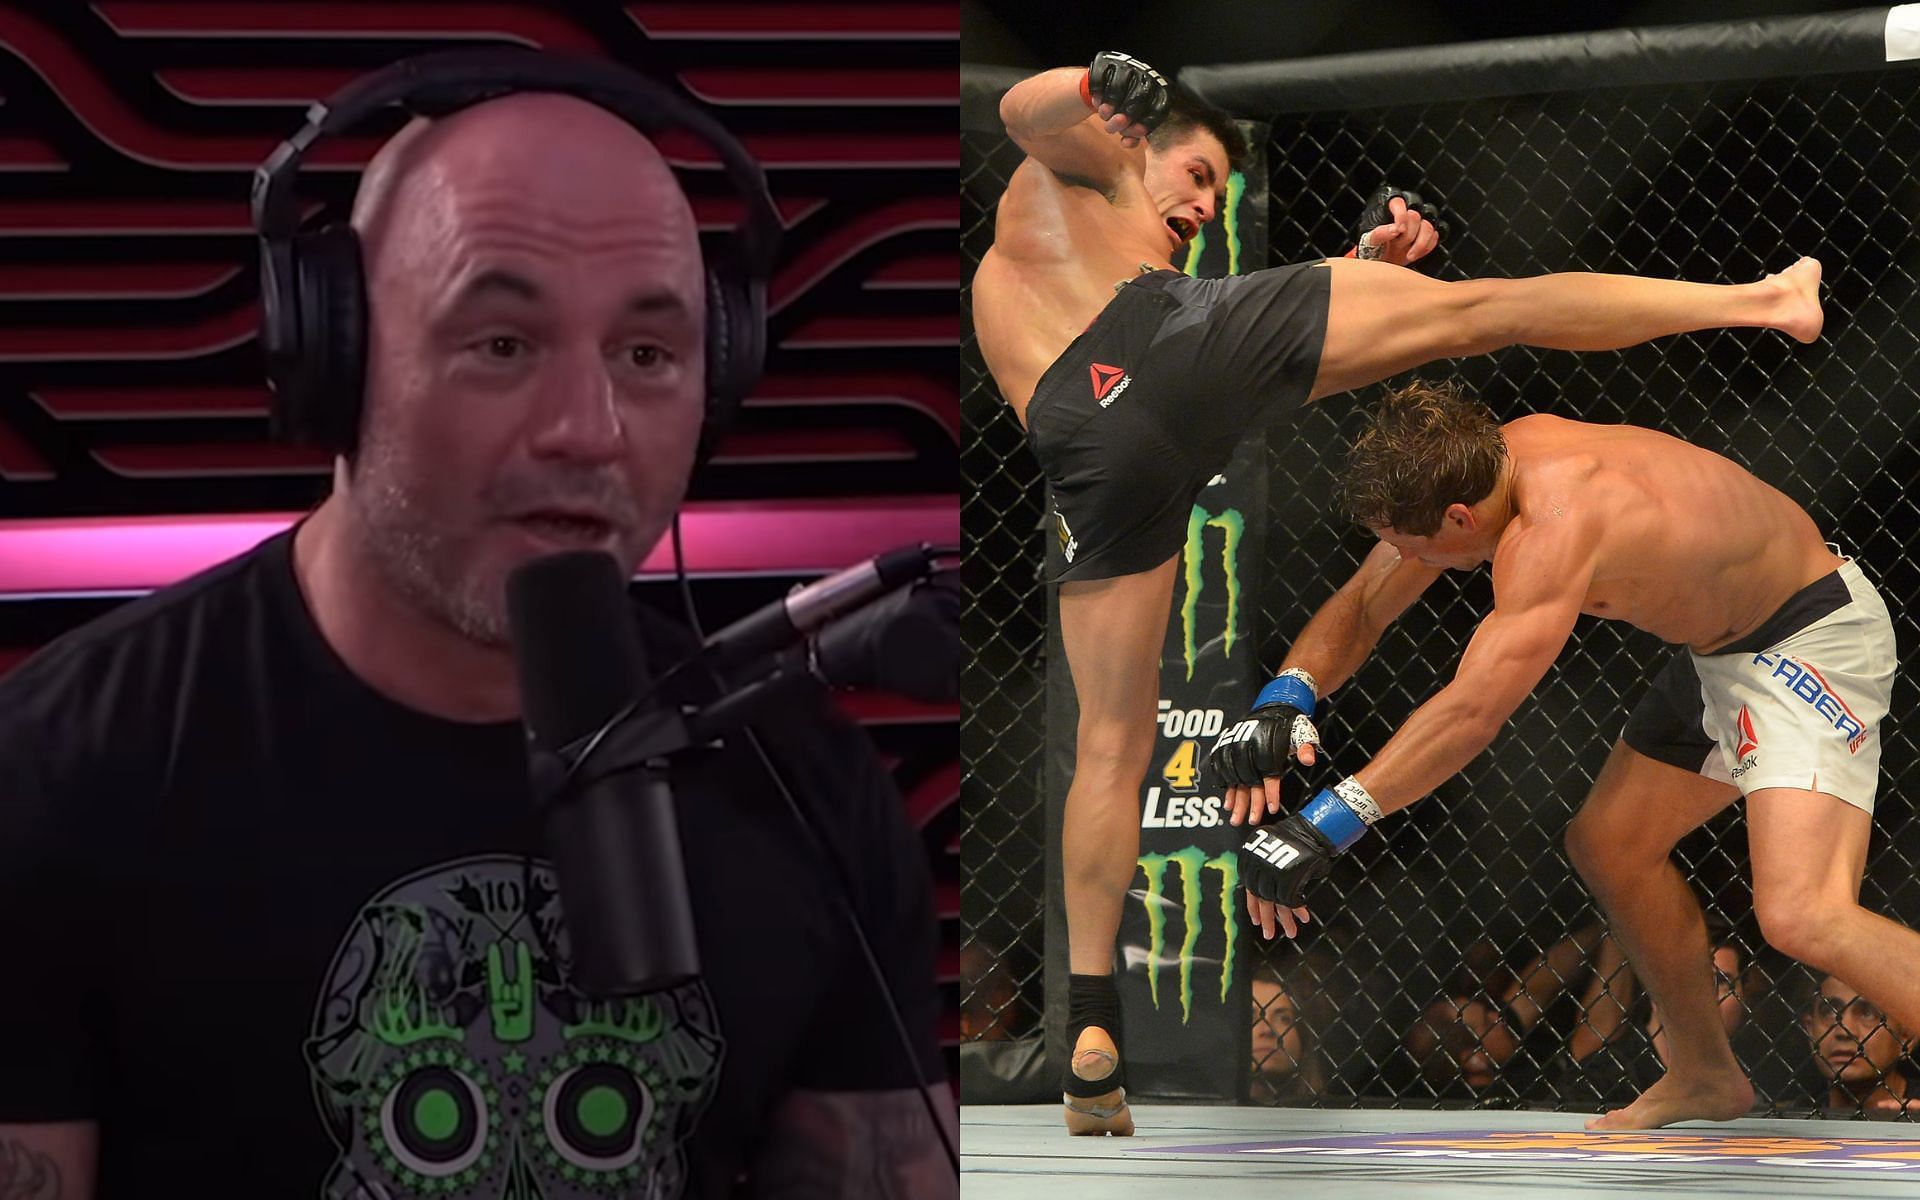 Joe Rogan (left) and Dominick Cruz (middle) [Images credits: JRE Clips YouTube channel and Getty Images]